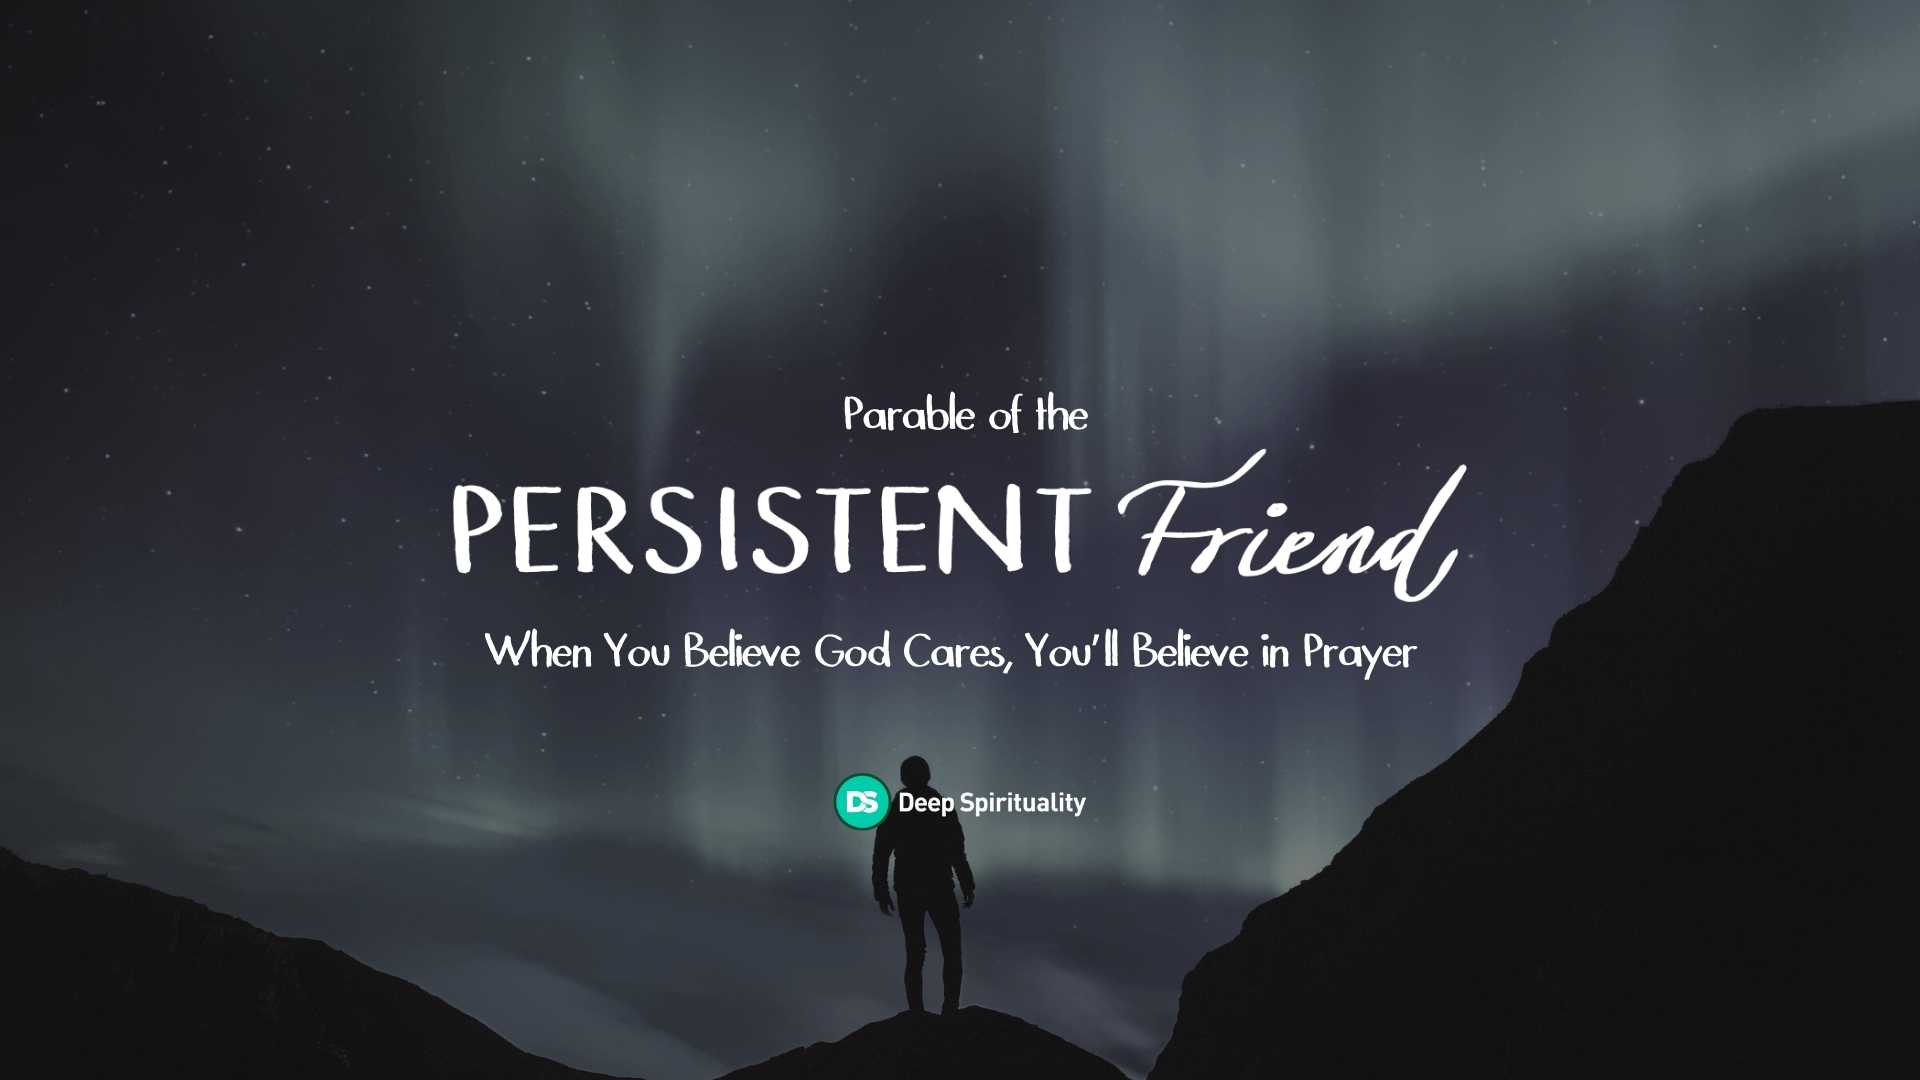 You Can Count On Me: What We Should Learn from the Parable of the Persistent Friend 3